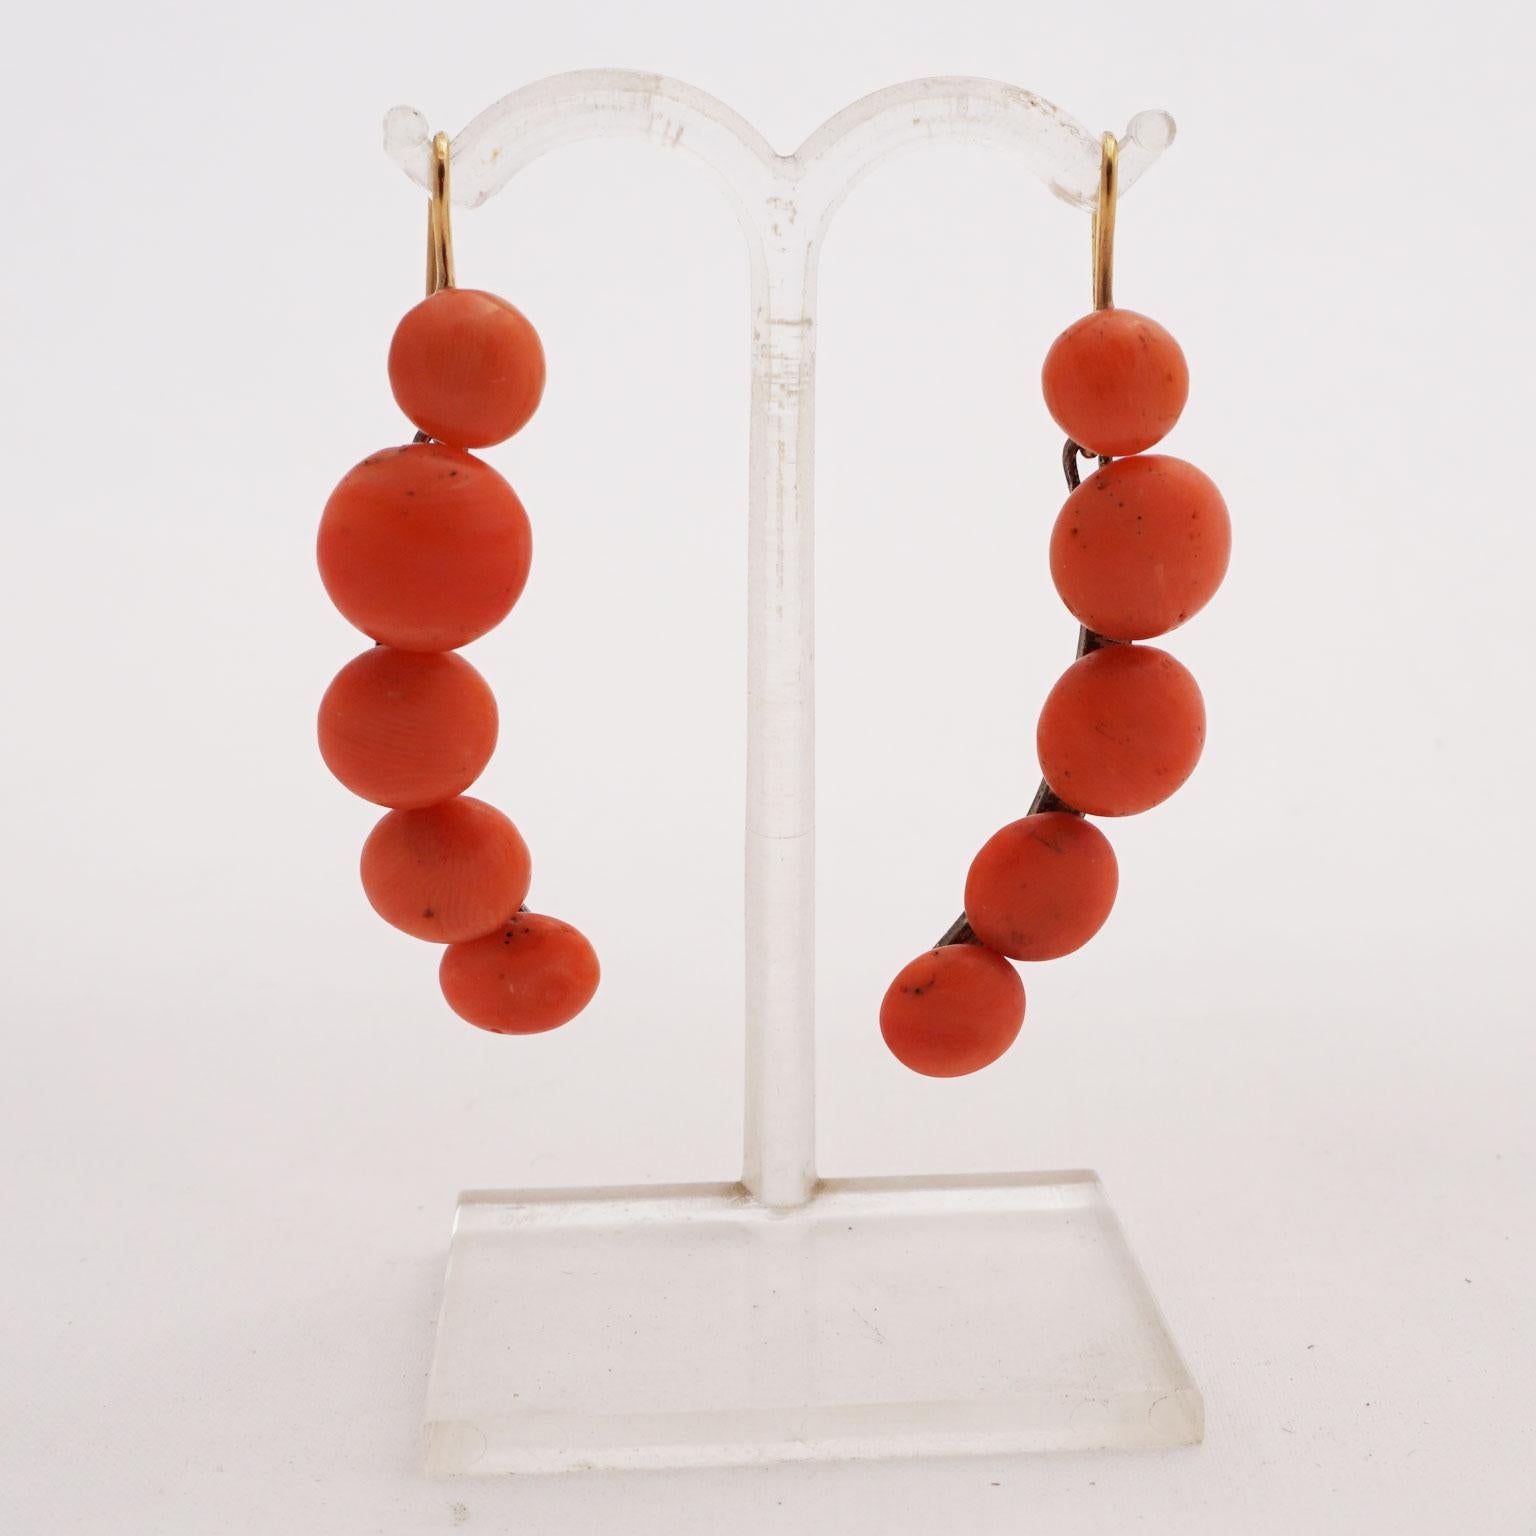 Coral earrings in hanging form

This pair of earrings made of delicate pink coral caresses the face of its wearer in a very graceful way. Four flat pearls each are fixed on an anatomically curved splint on 925 sterling silver. The more recent Brisur